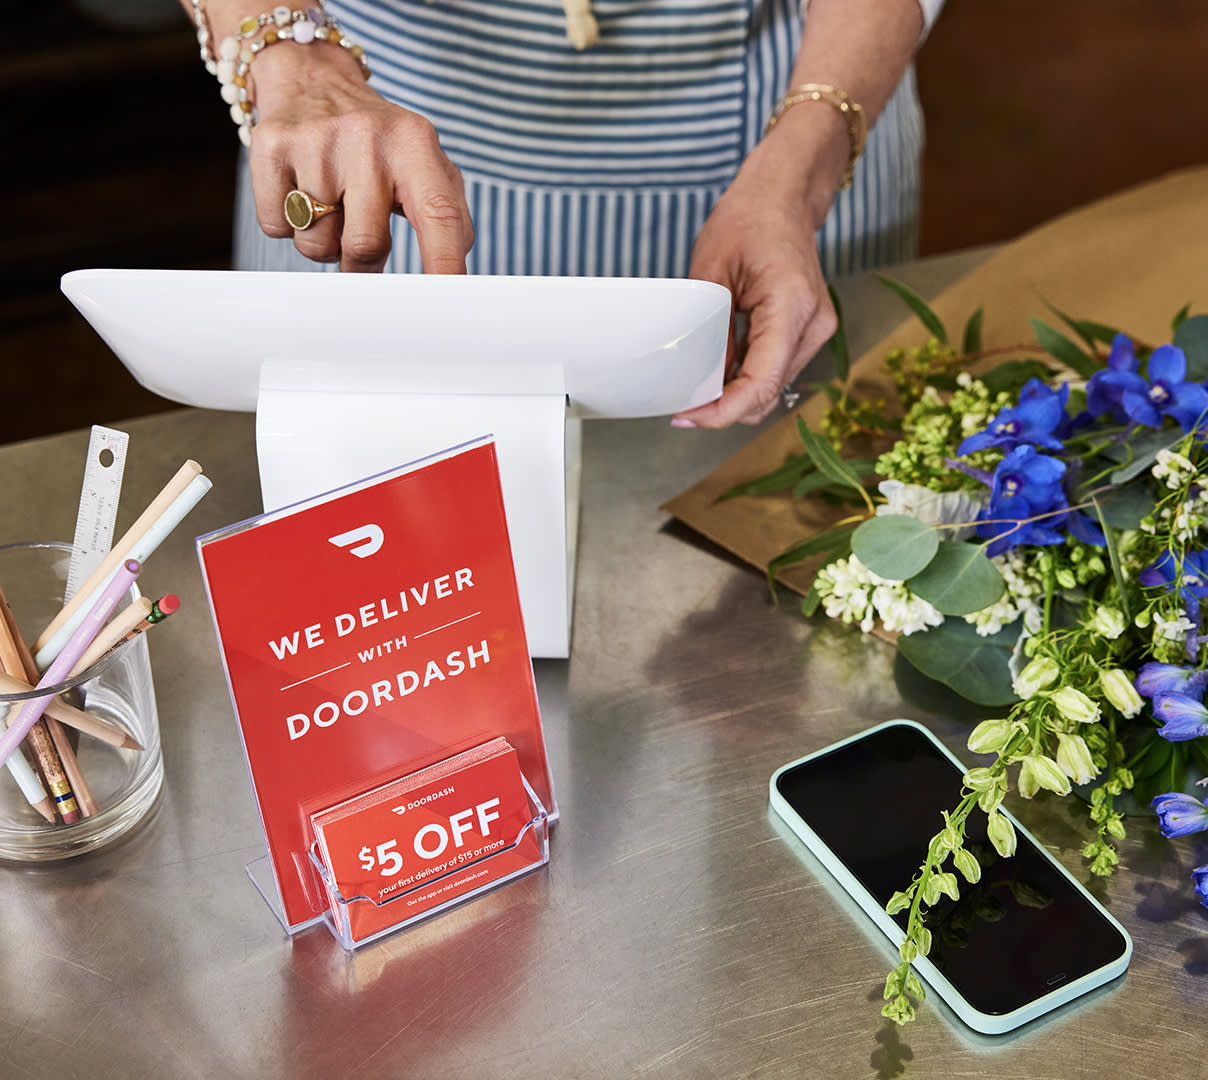 Small business counter with POS and phone with DoorDash coupons and flowers